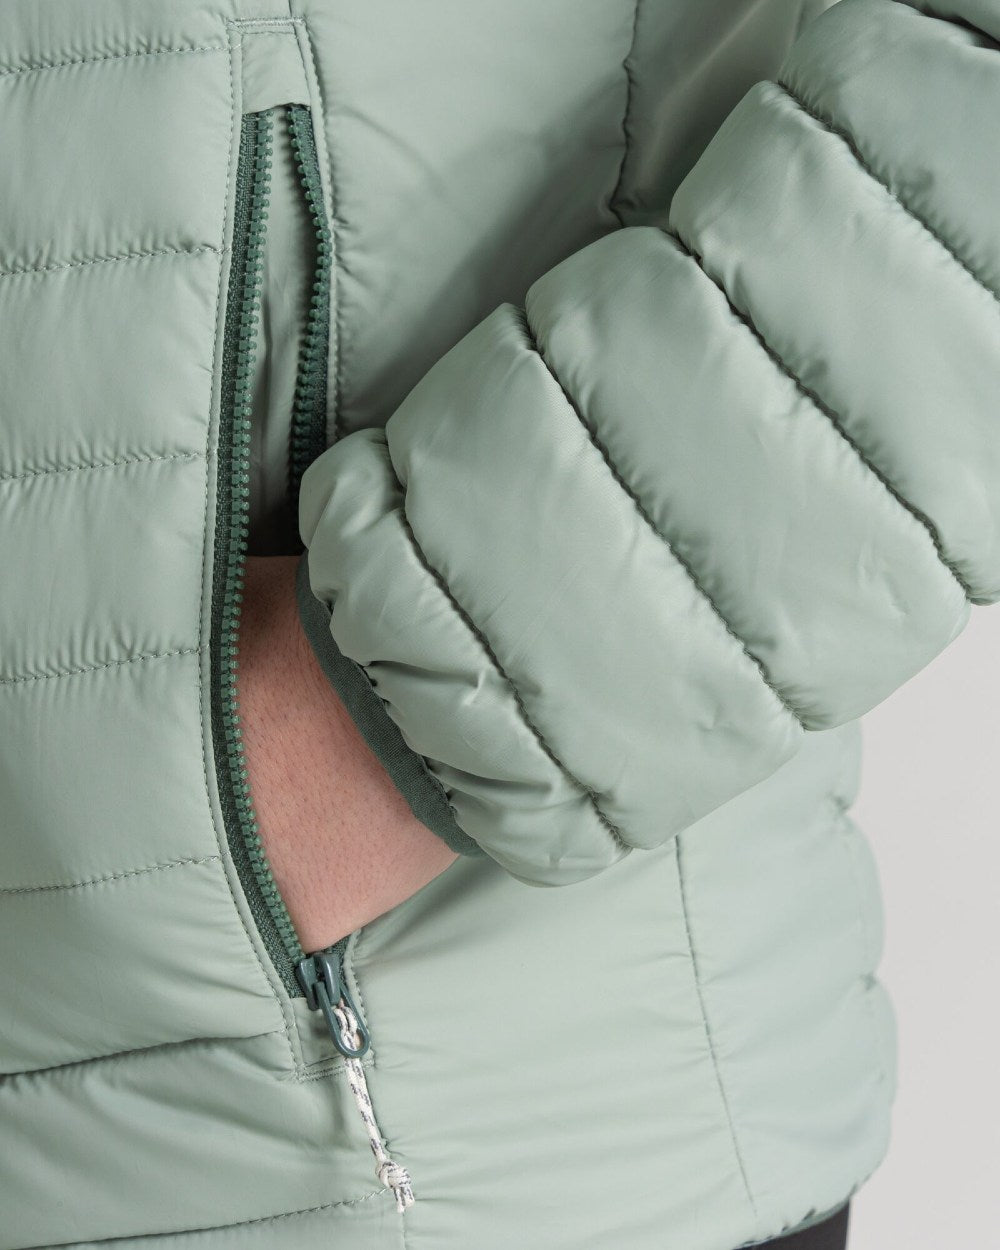 Craghoppers Womens Compresslite VIII Hooded Jacket in Meadow Haze/Frosted Pine 